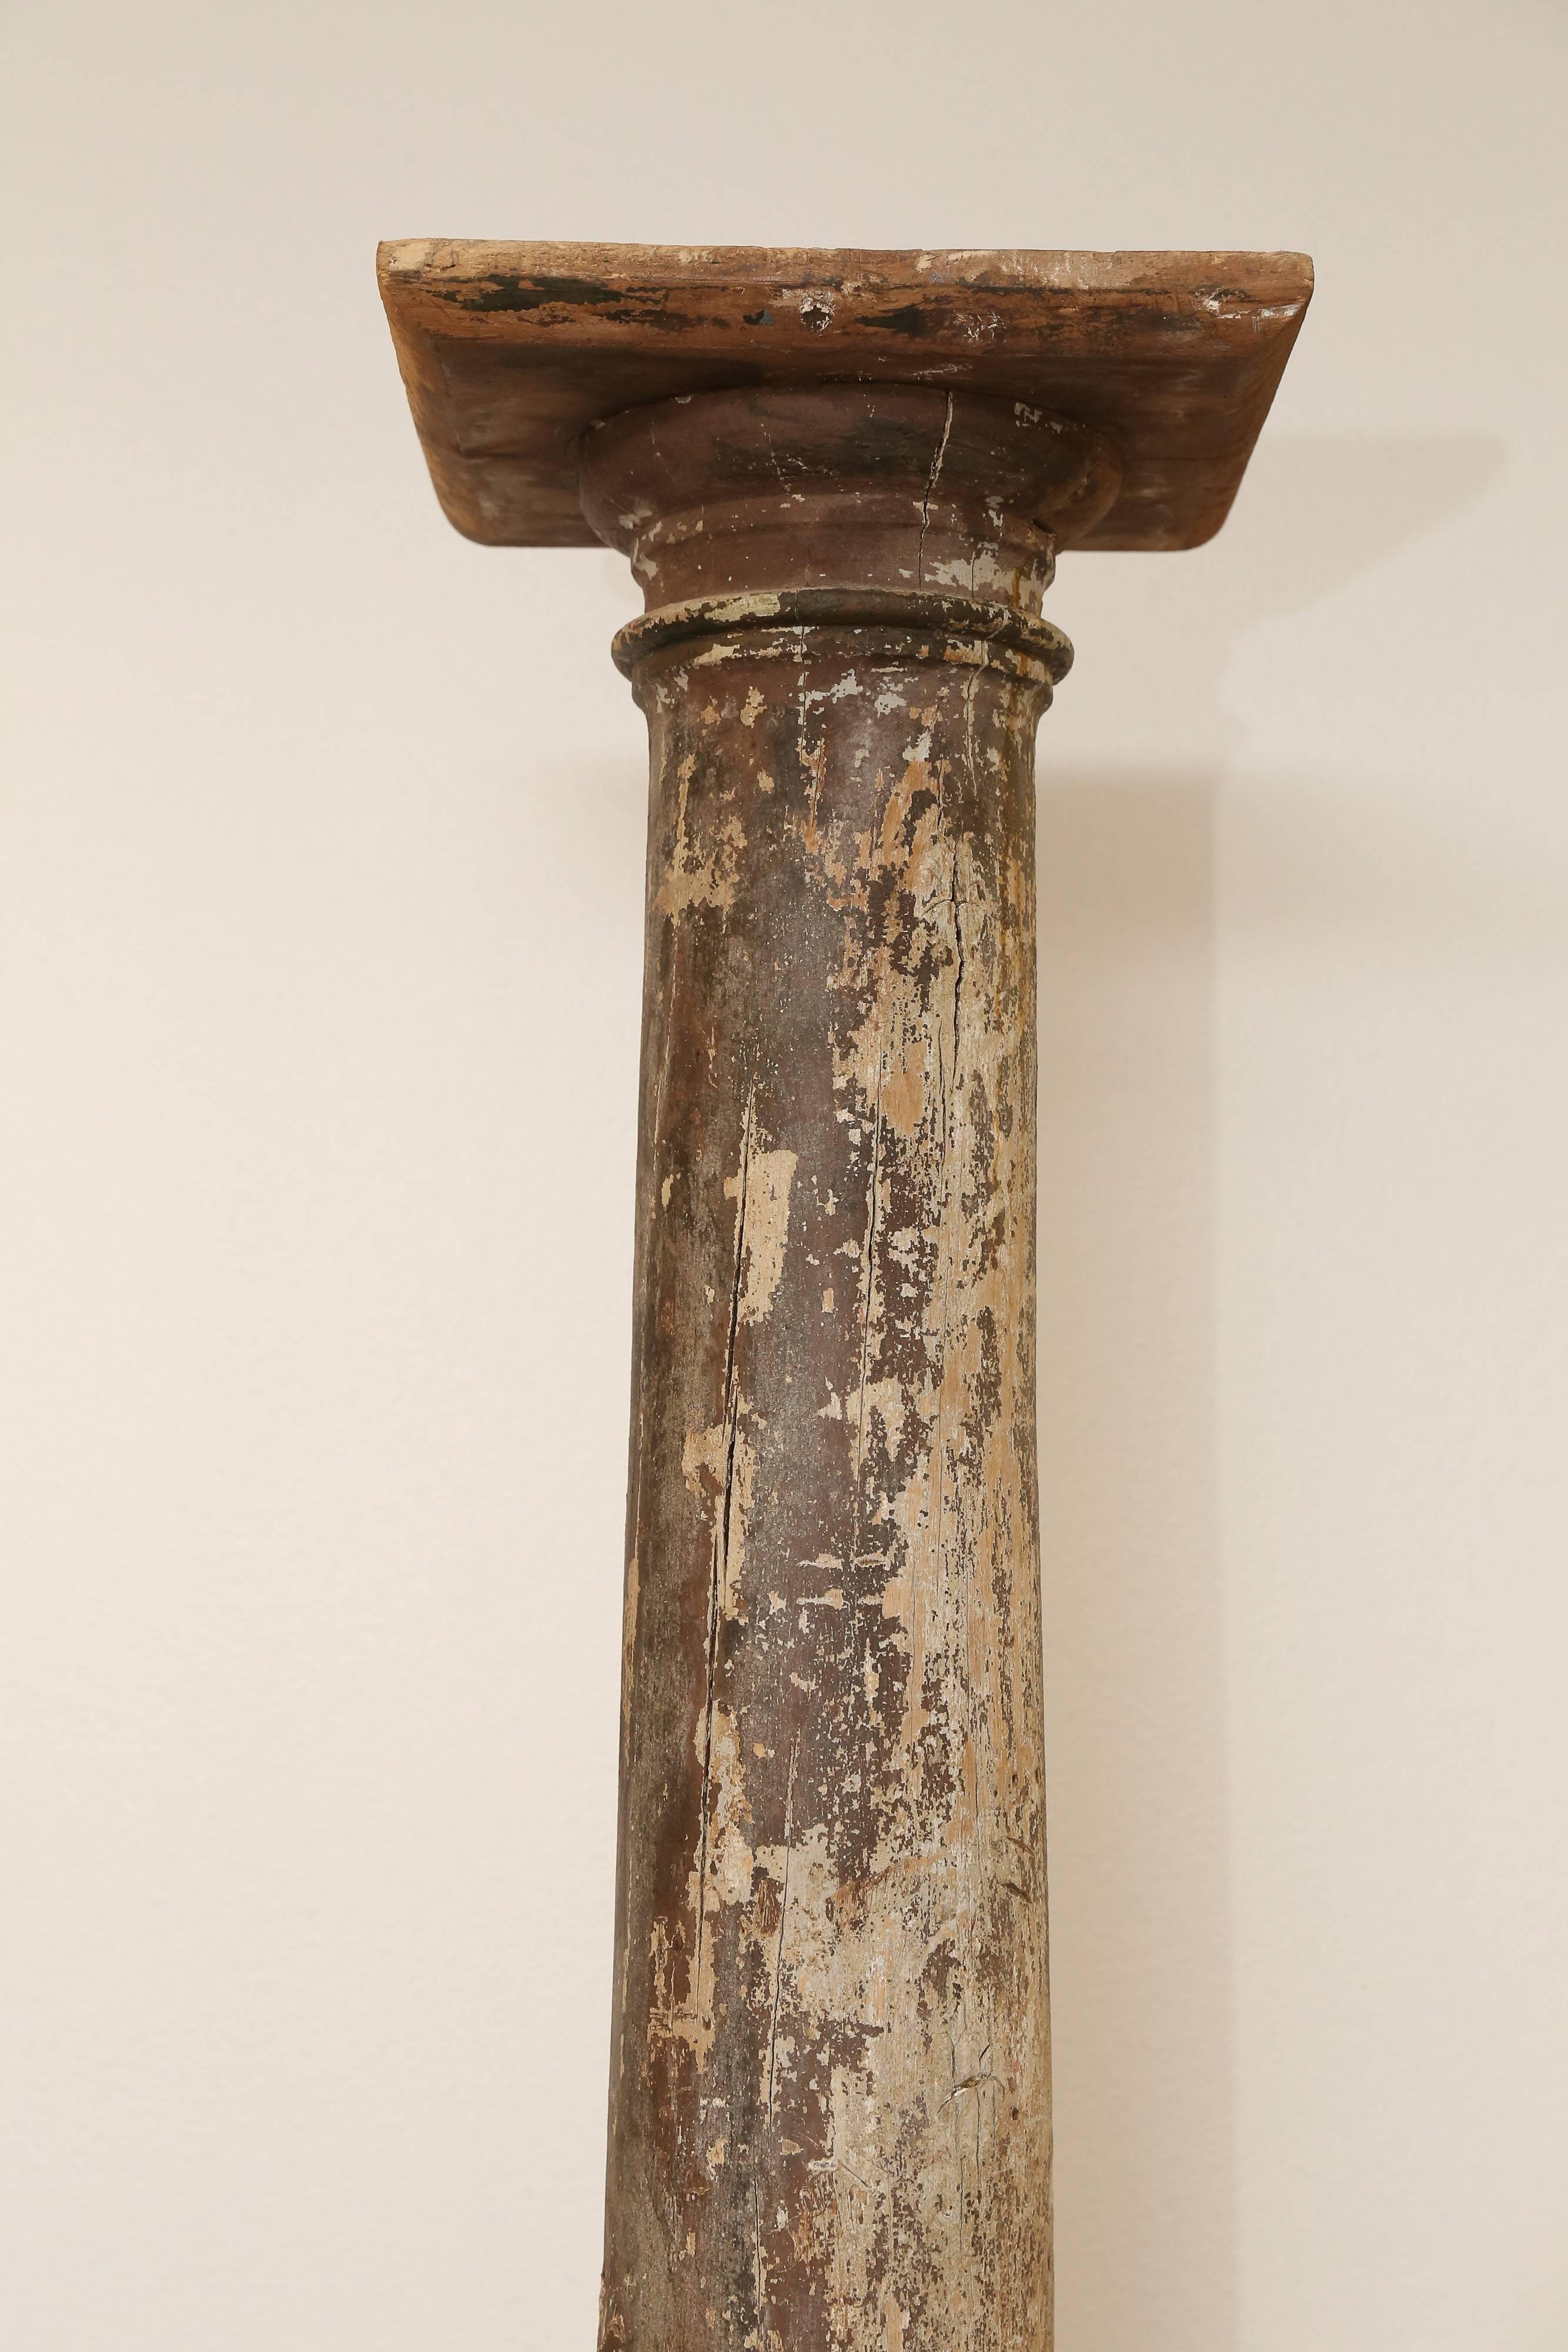 Patinated 19th century column with layers of paint. Base is 14 inches by 14 inches.